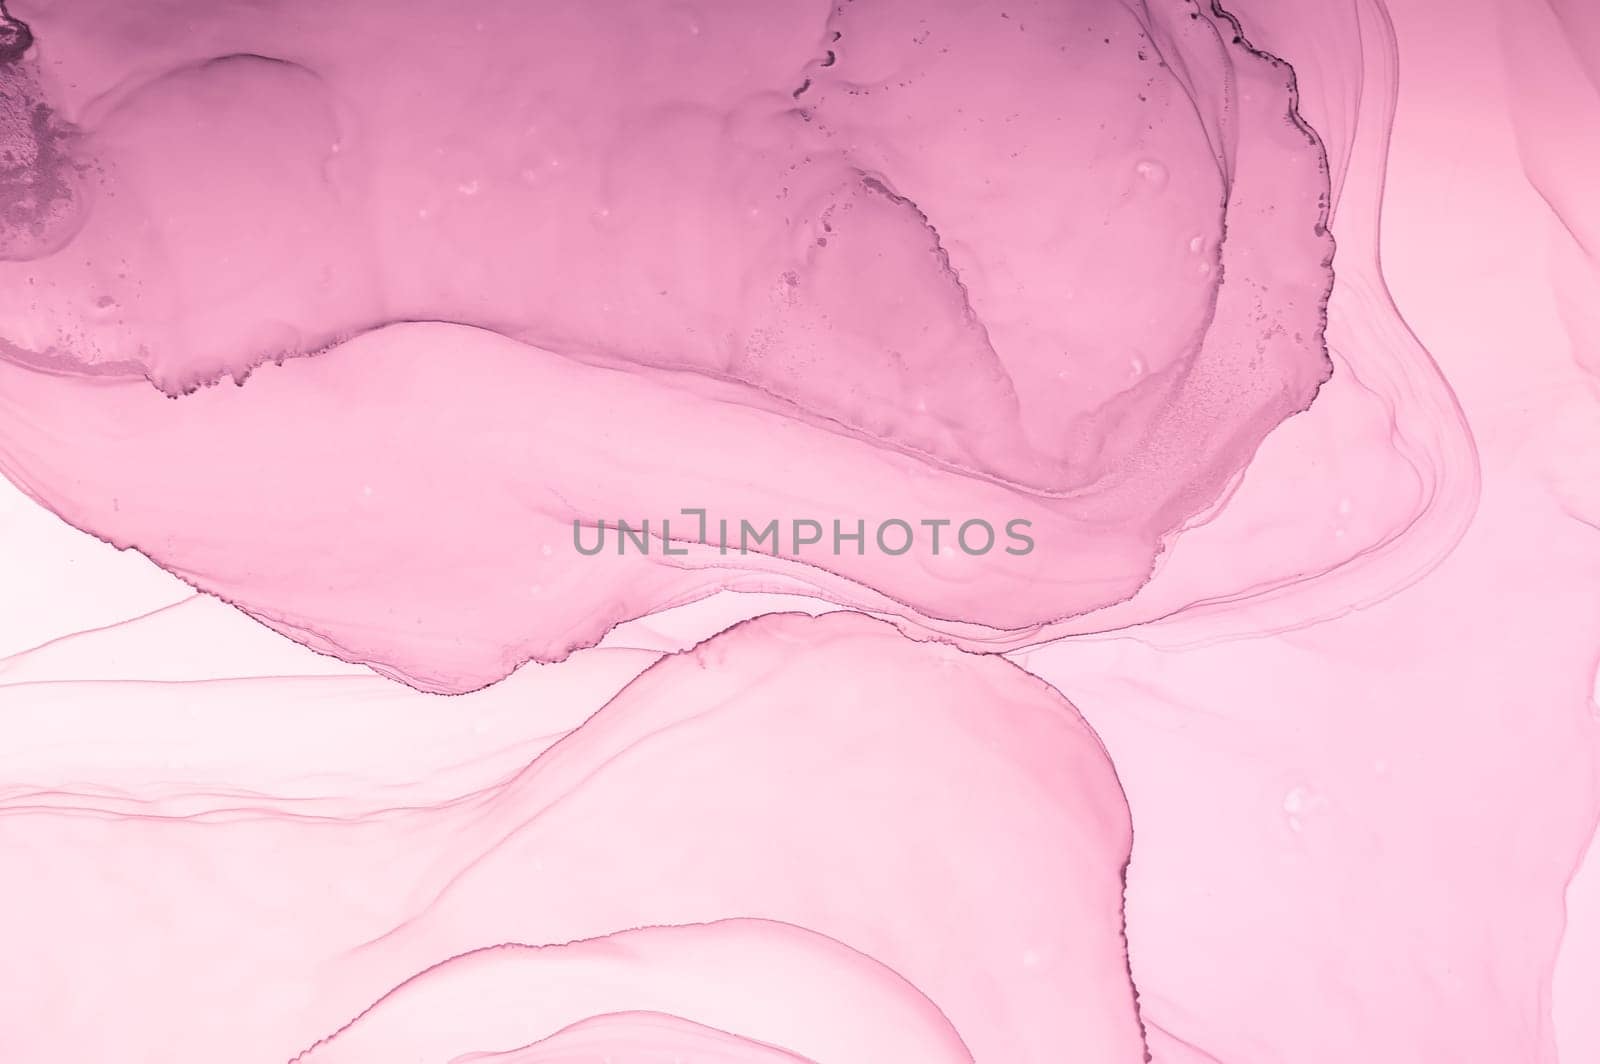 Spring Liquid Marble. Abstract Illustration. Fluid Flow Effect. Acrylic Splash. Rose Art Design. Alcohol Luxury Marble. Gentle Mix. Oil Grunge Texture. Watercolour Pink Marble.